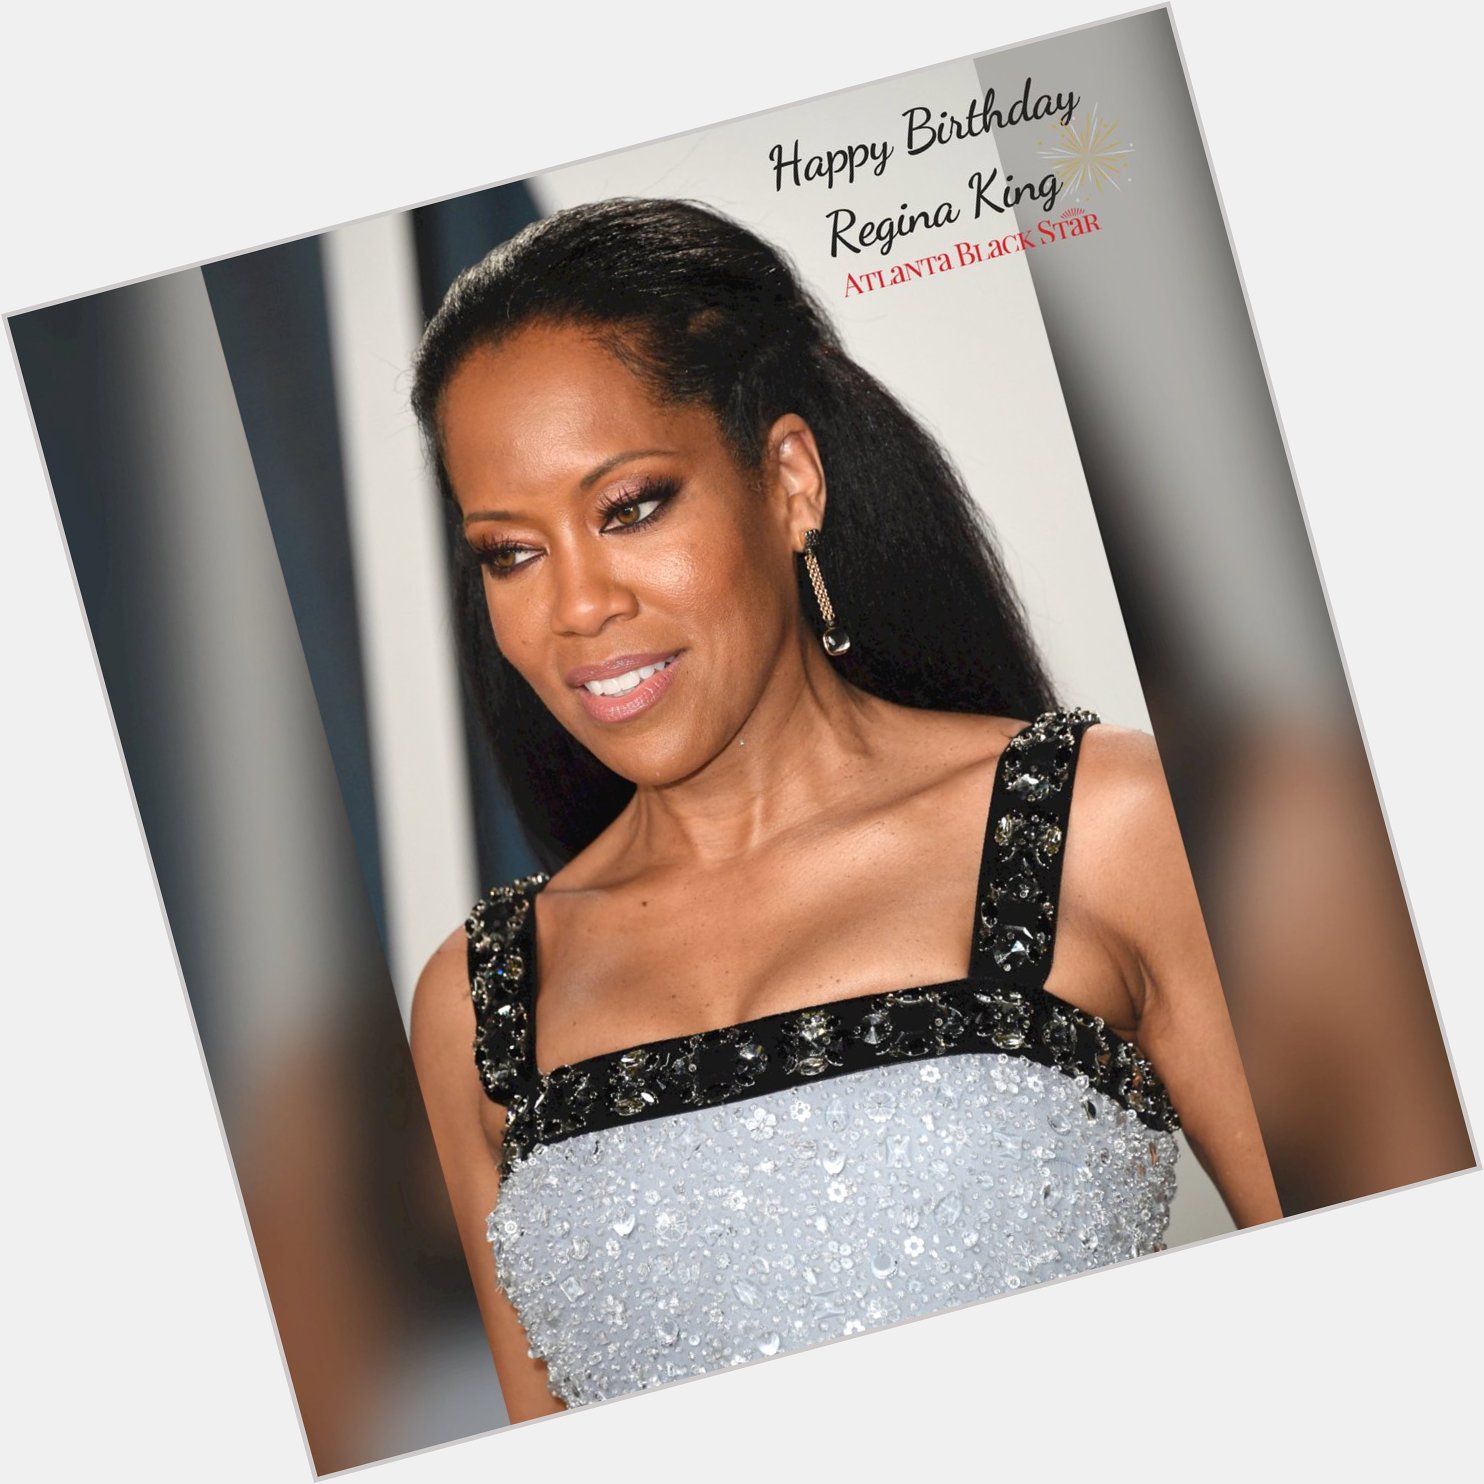 Happy 50th Birthday to Regina King! We are wishing you many more to come 